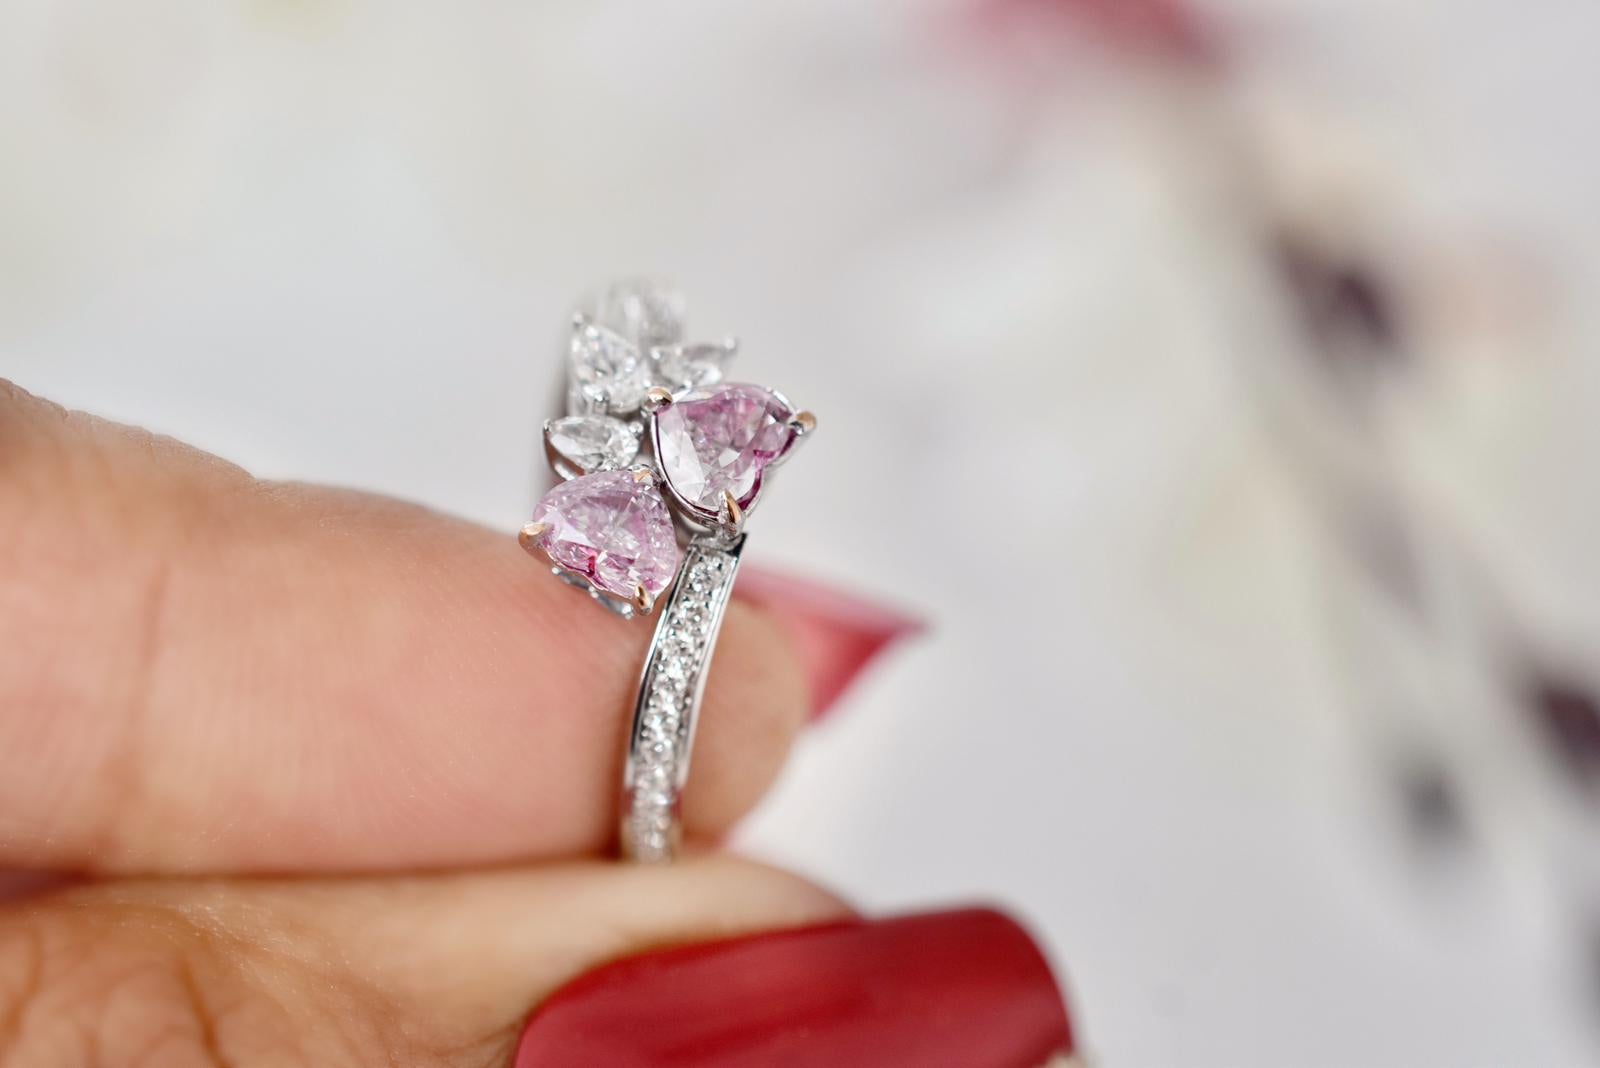 Heart Cut 0.55 Carat Faint Pink Diamond Cocktail Ring GIA Certified For Sale